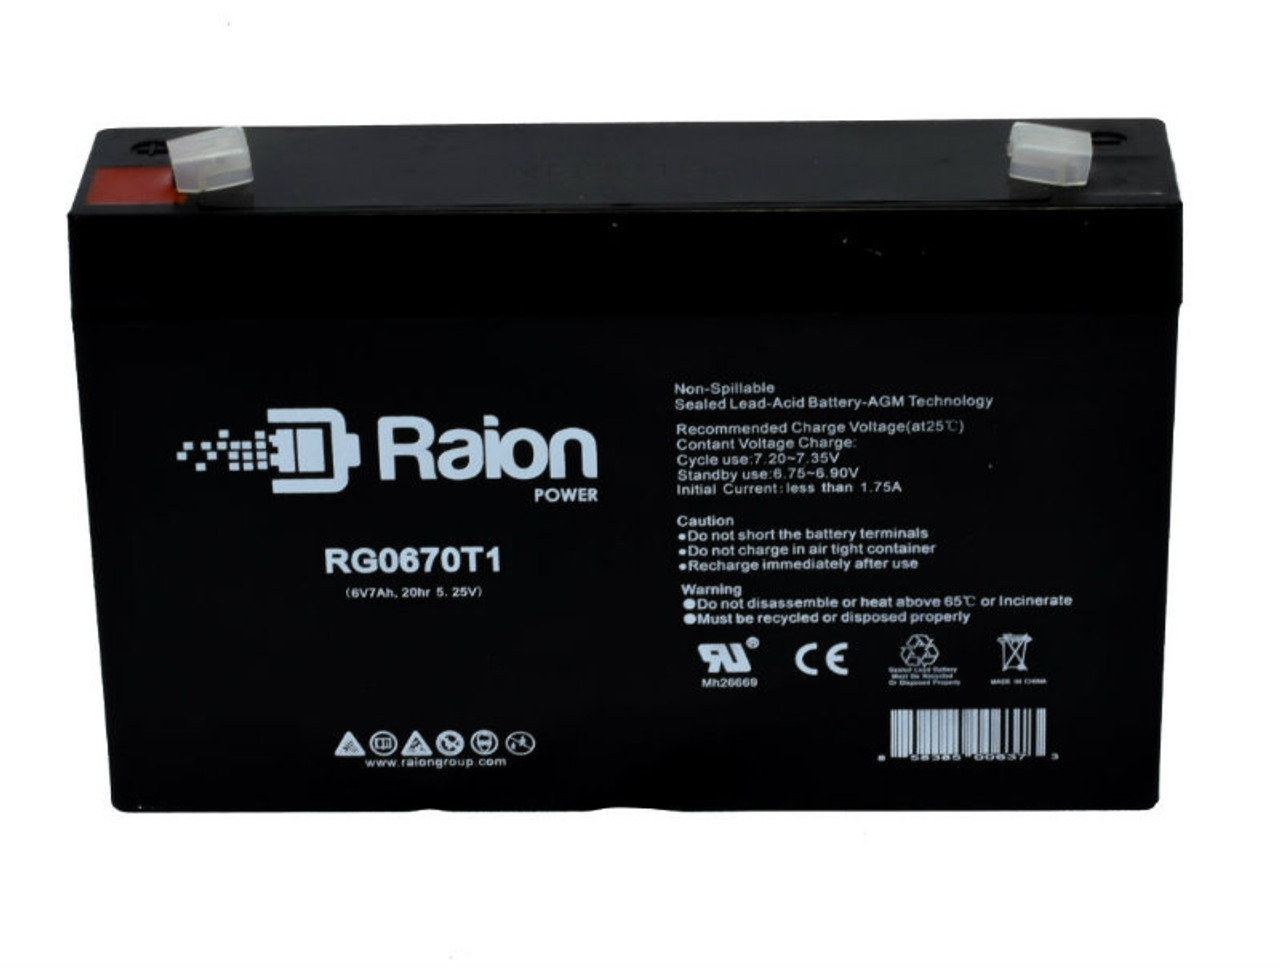 Raion Power RG0670T1 Replacement Battery Cartridge for Sure-Lites 12V1504